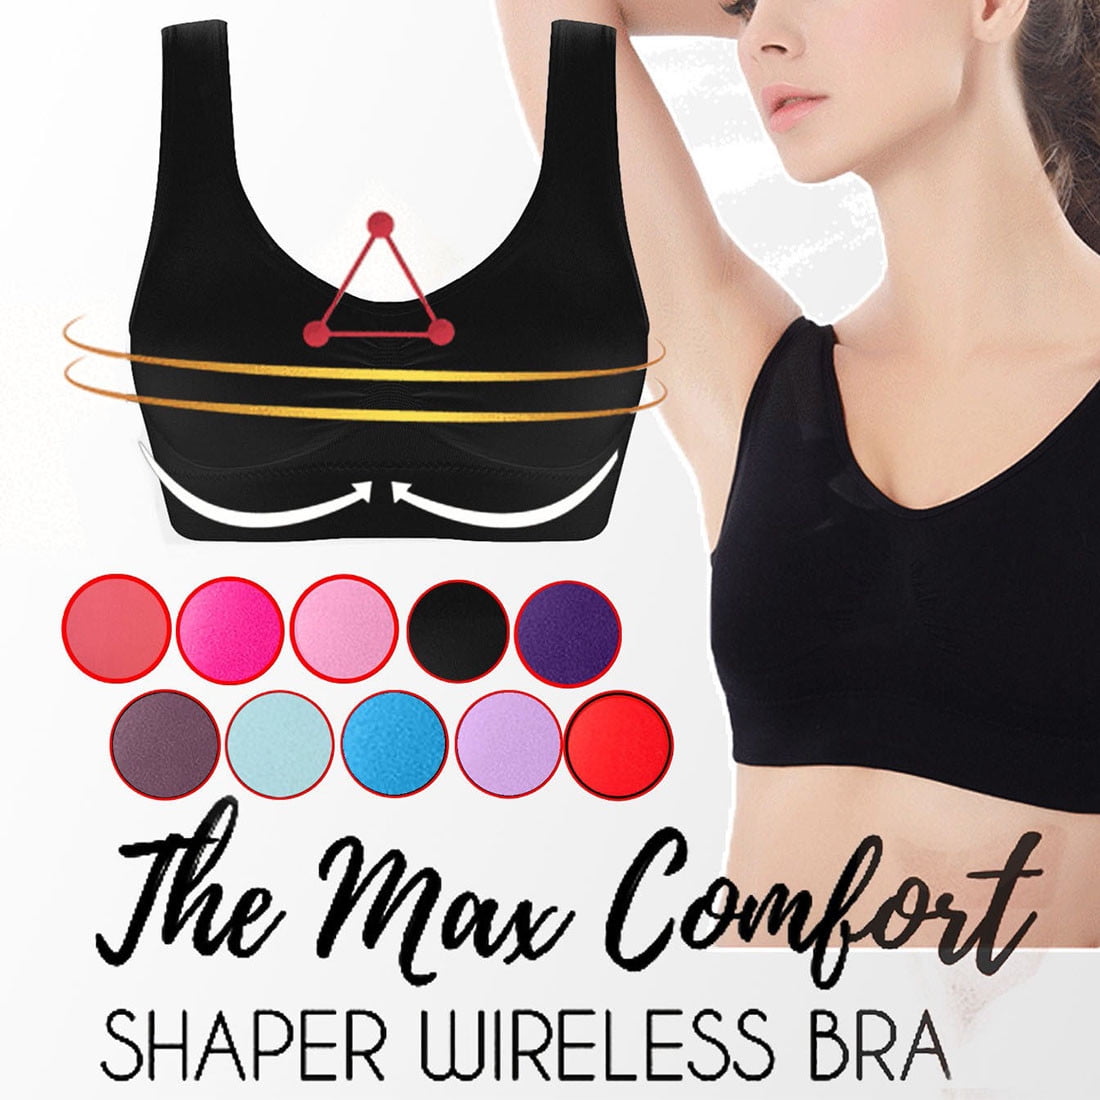 Plus Size - Anti-Sagging Wirefree Bra, Seamless Women's Sports Wireless Bra,  Breathable Cool Lift Up Air Bra (2PC-A,S) at  Women's Clothing store